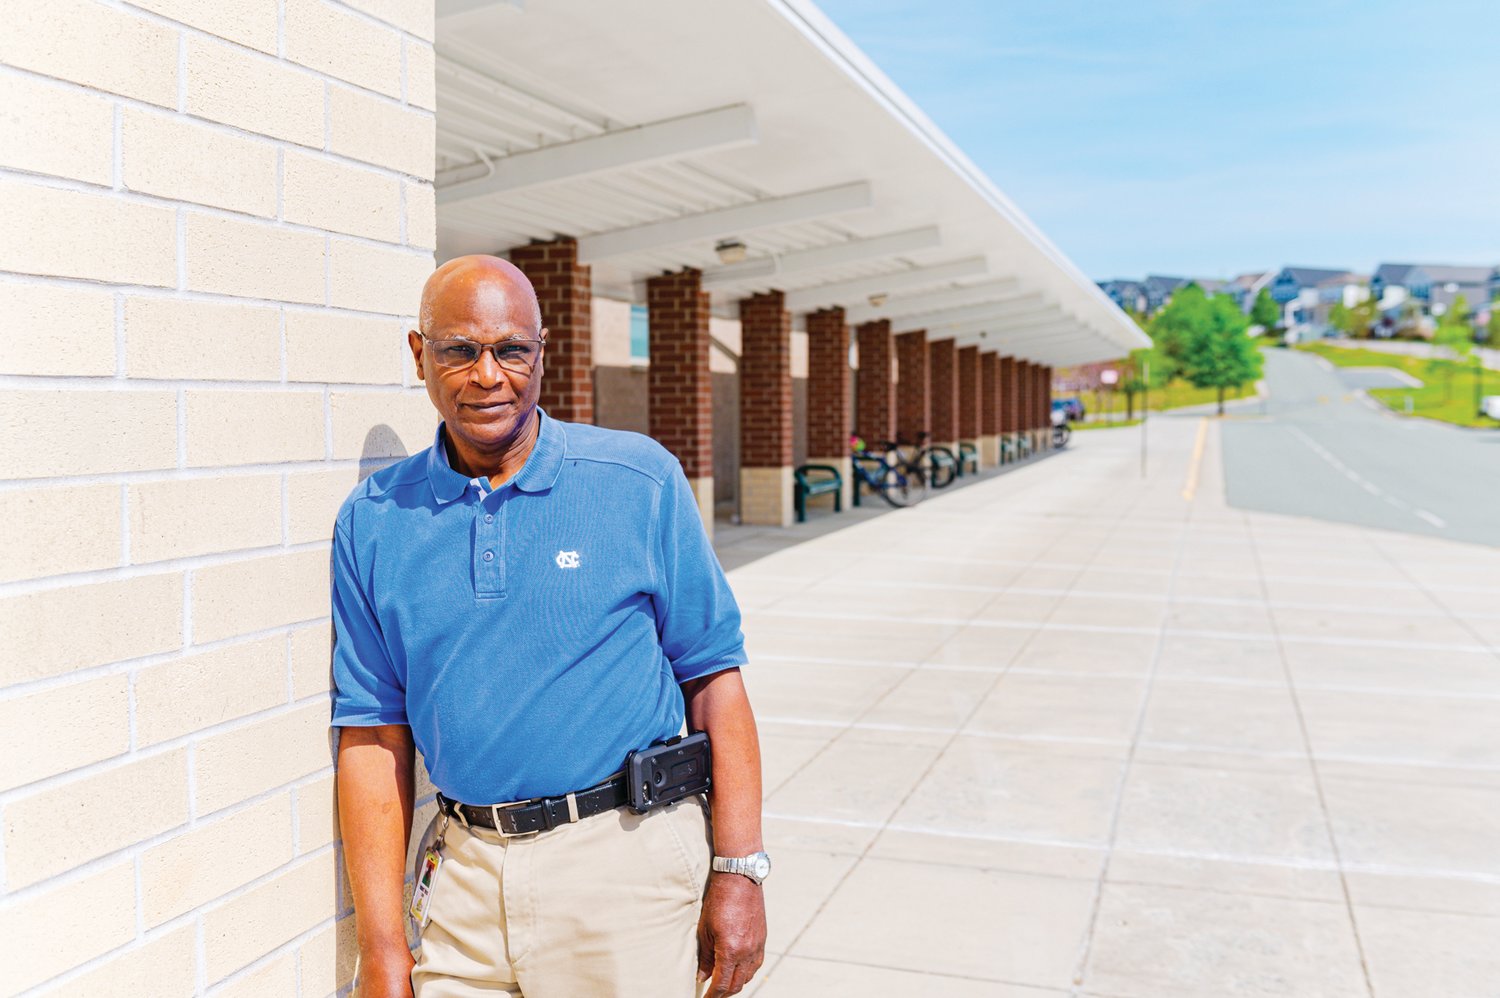 Hubert West, shown here at Margaret B. Pollard Middle School, was the first Black head coach at UNC-Chapel Hill. Now a teaching assistant, West led UNC's track and field program from 1981-83.